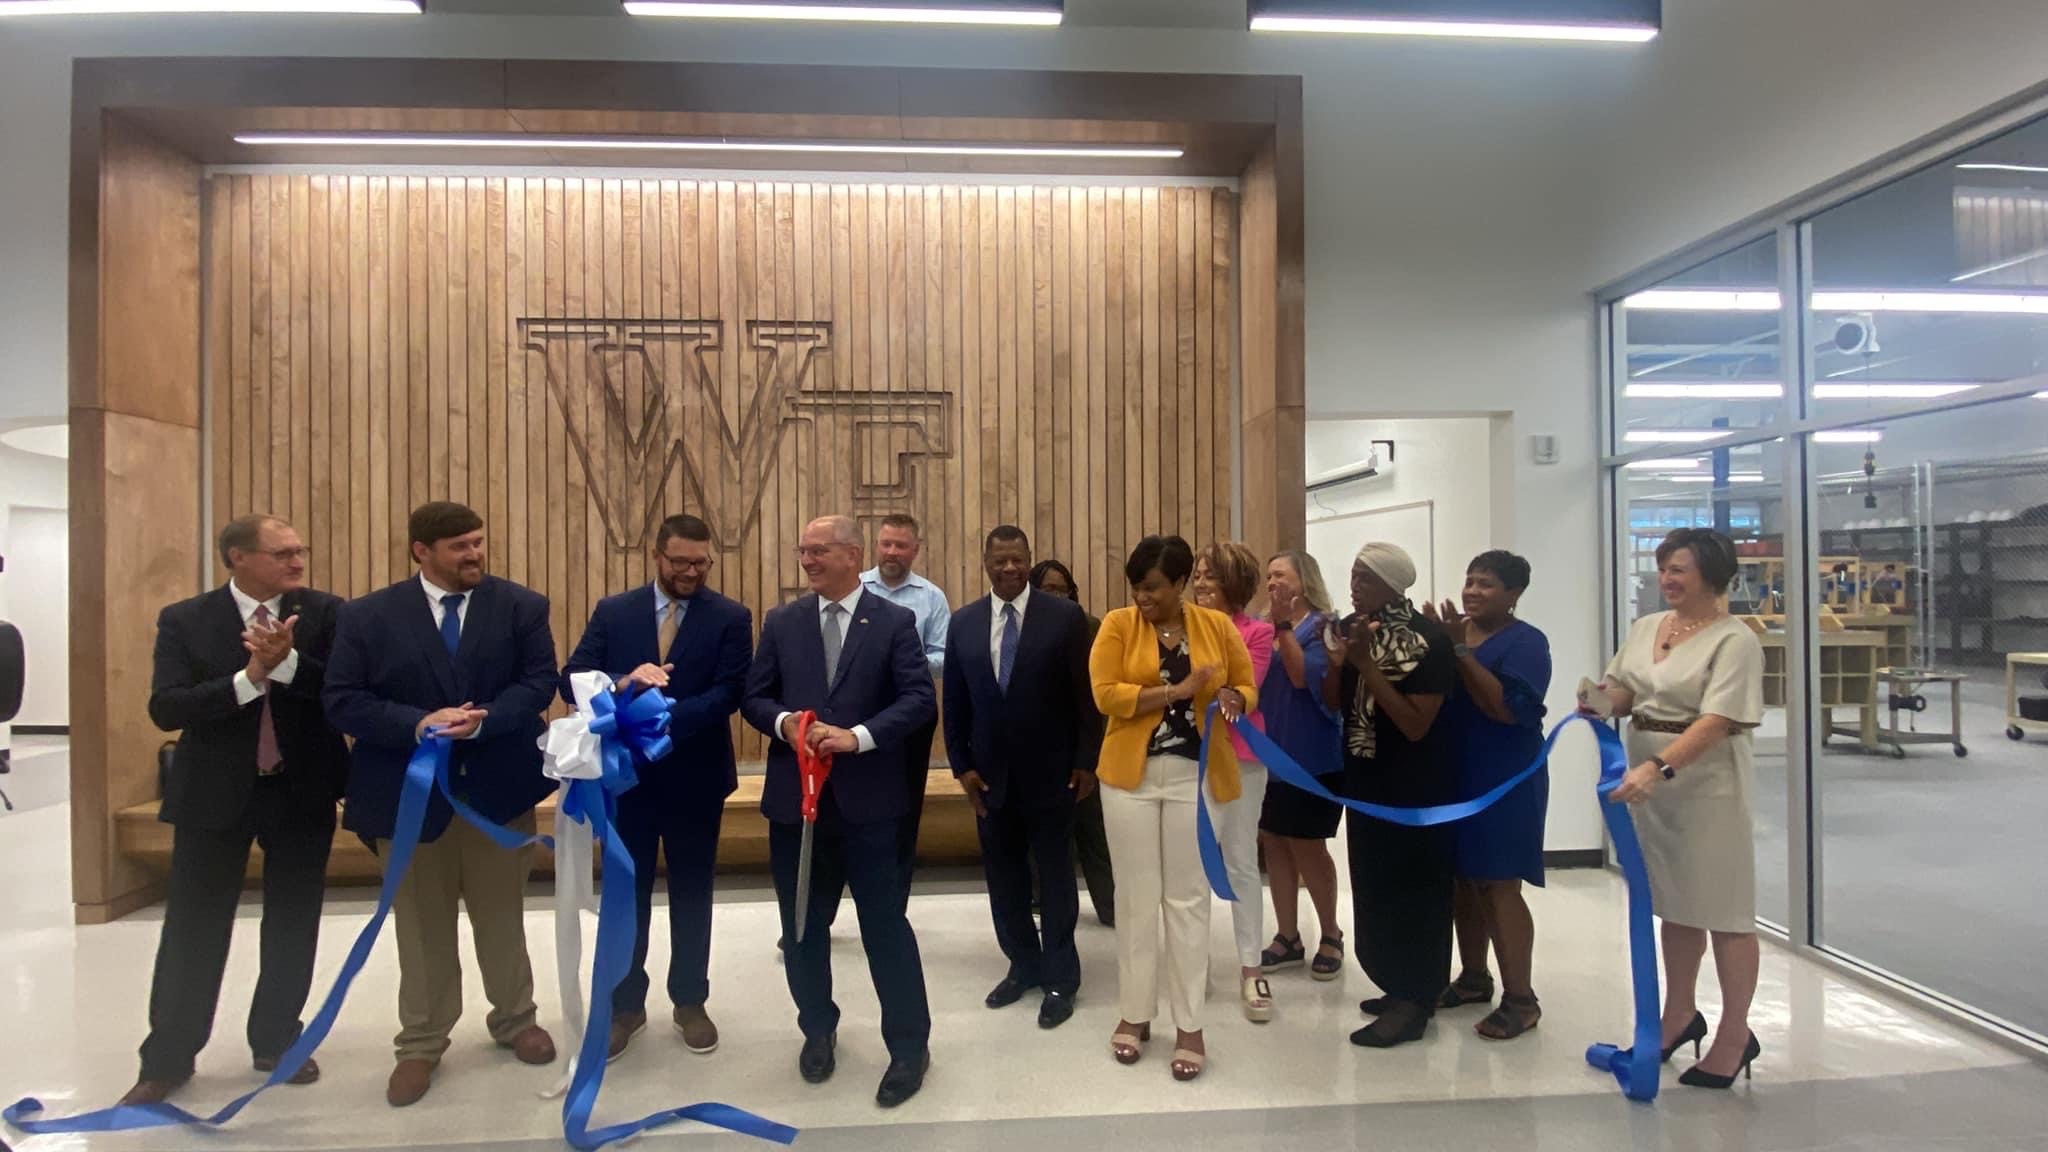 Ribbon-Cutting Ceremony held for the new West Feliciana Elementary School